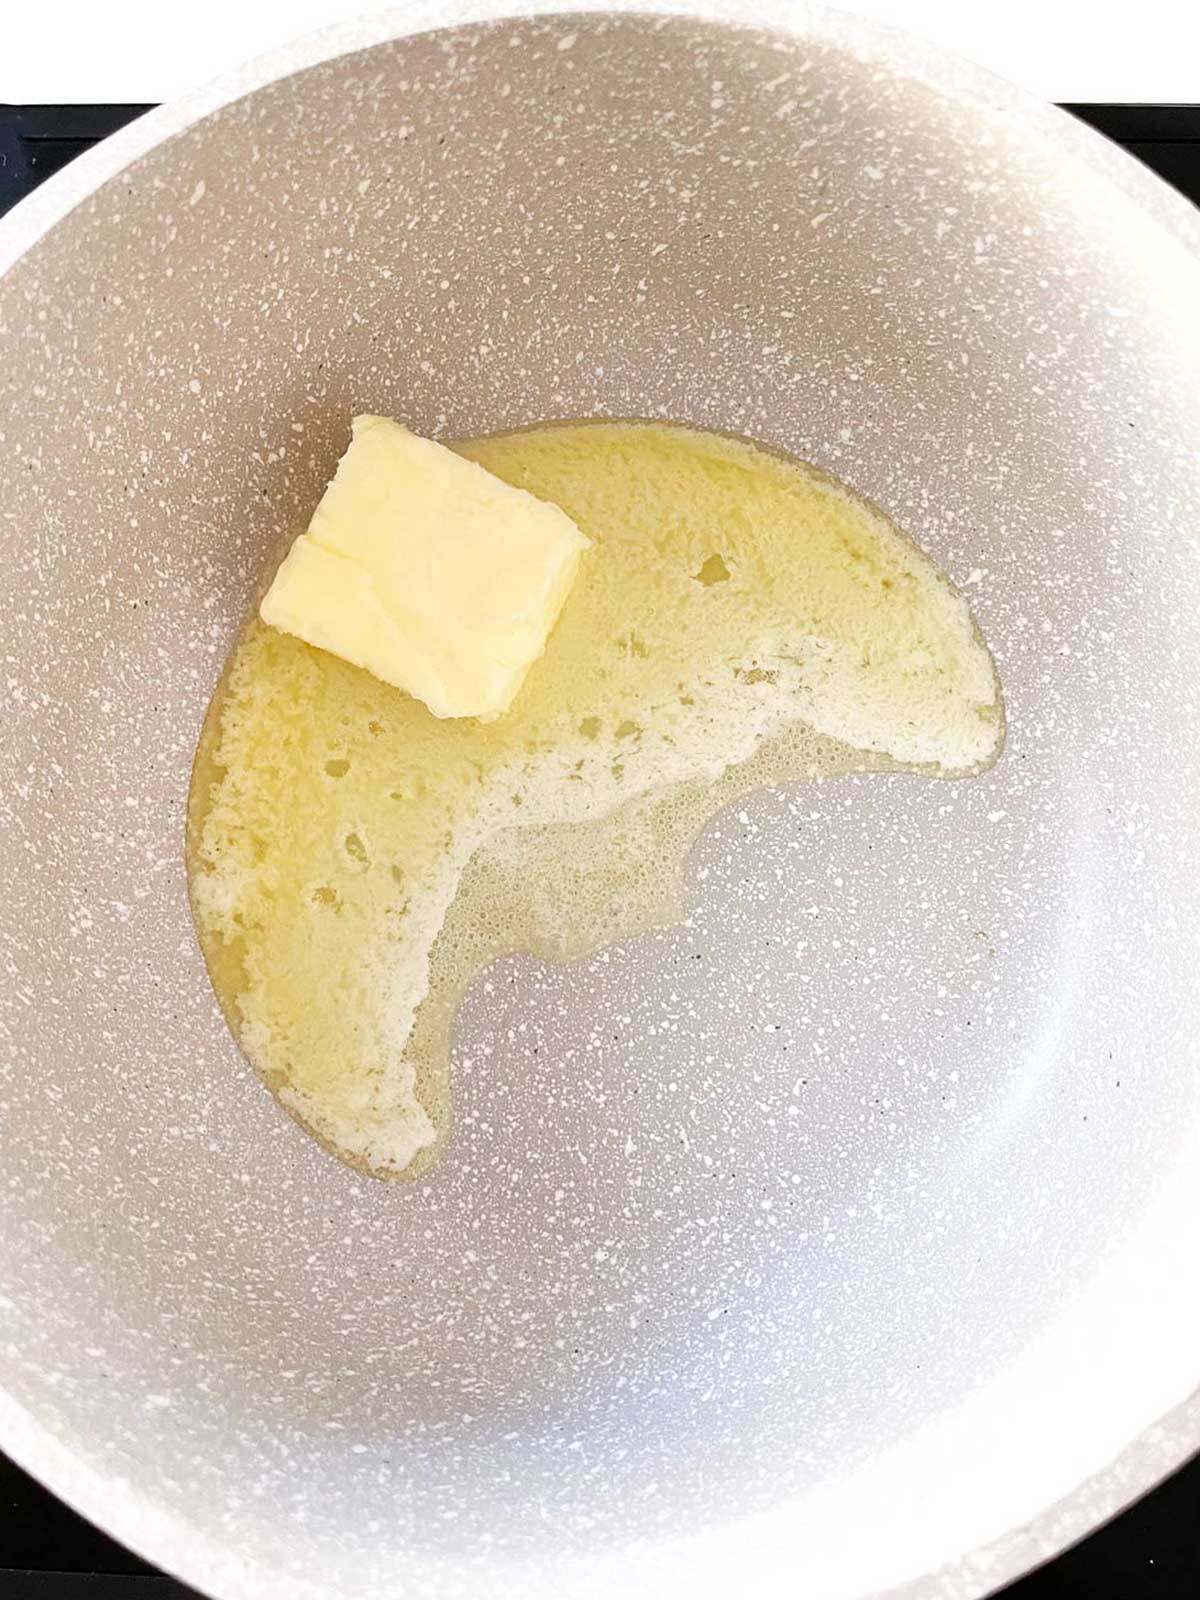 Butter melting in the pot.